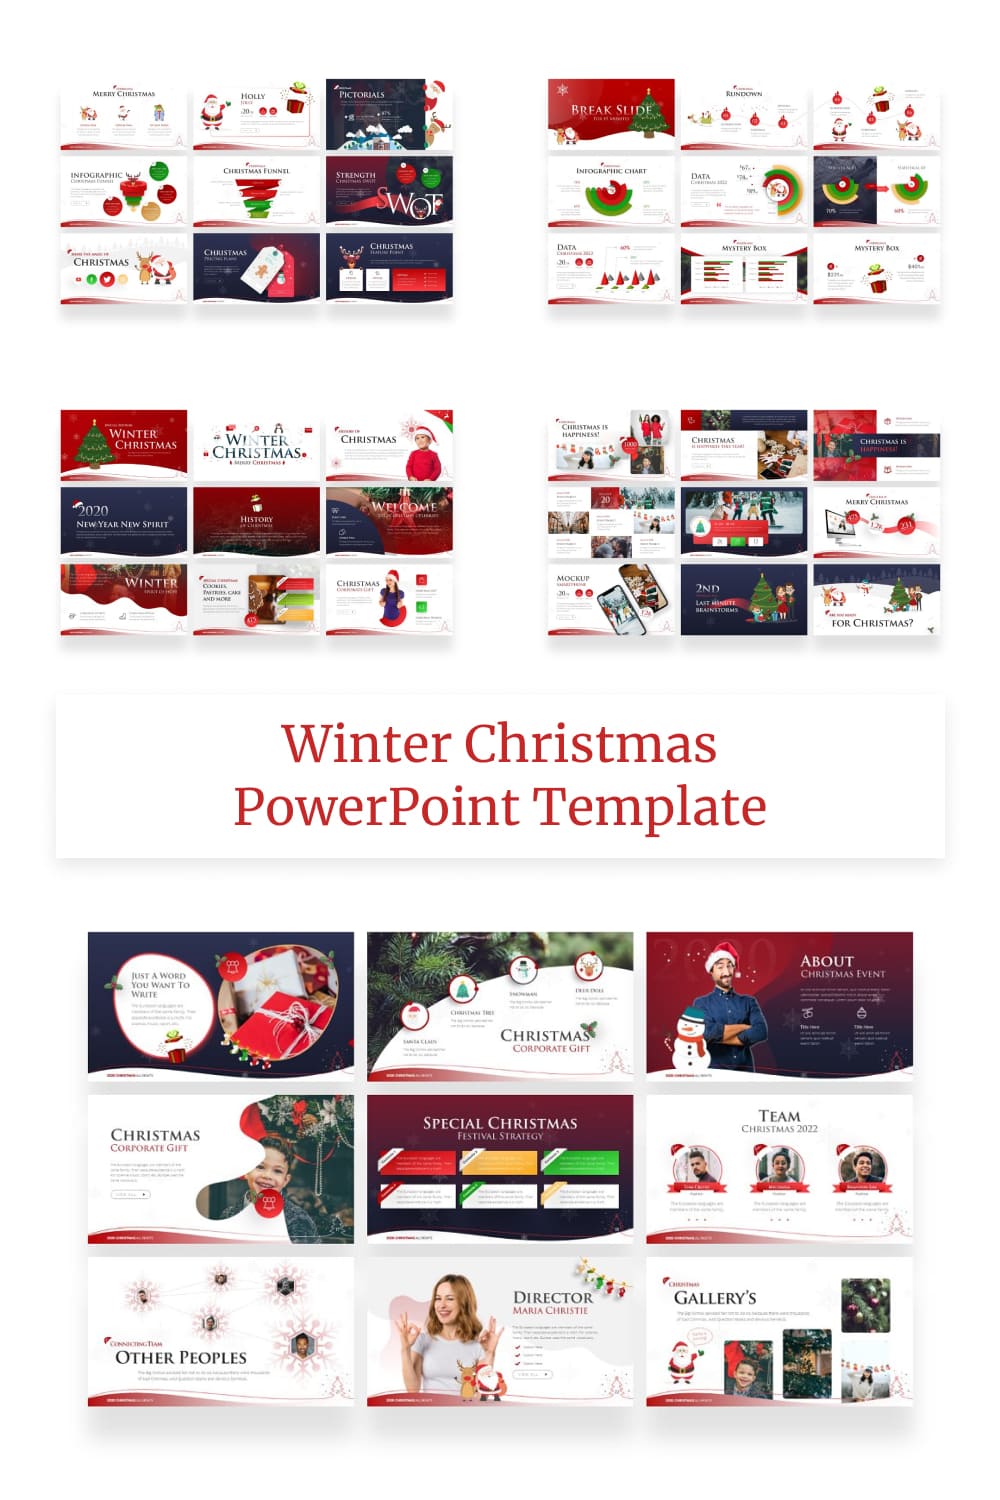 Winter Christmas PowerPoint Template by MasterBundles Pinterest Collage Image.